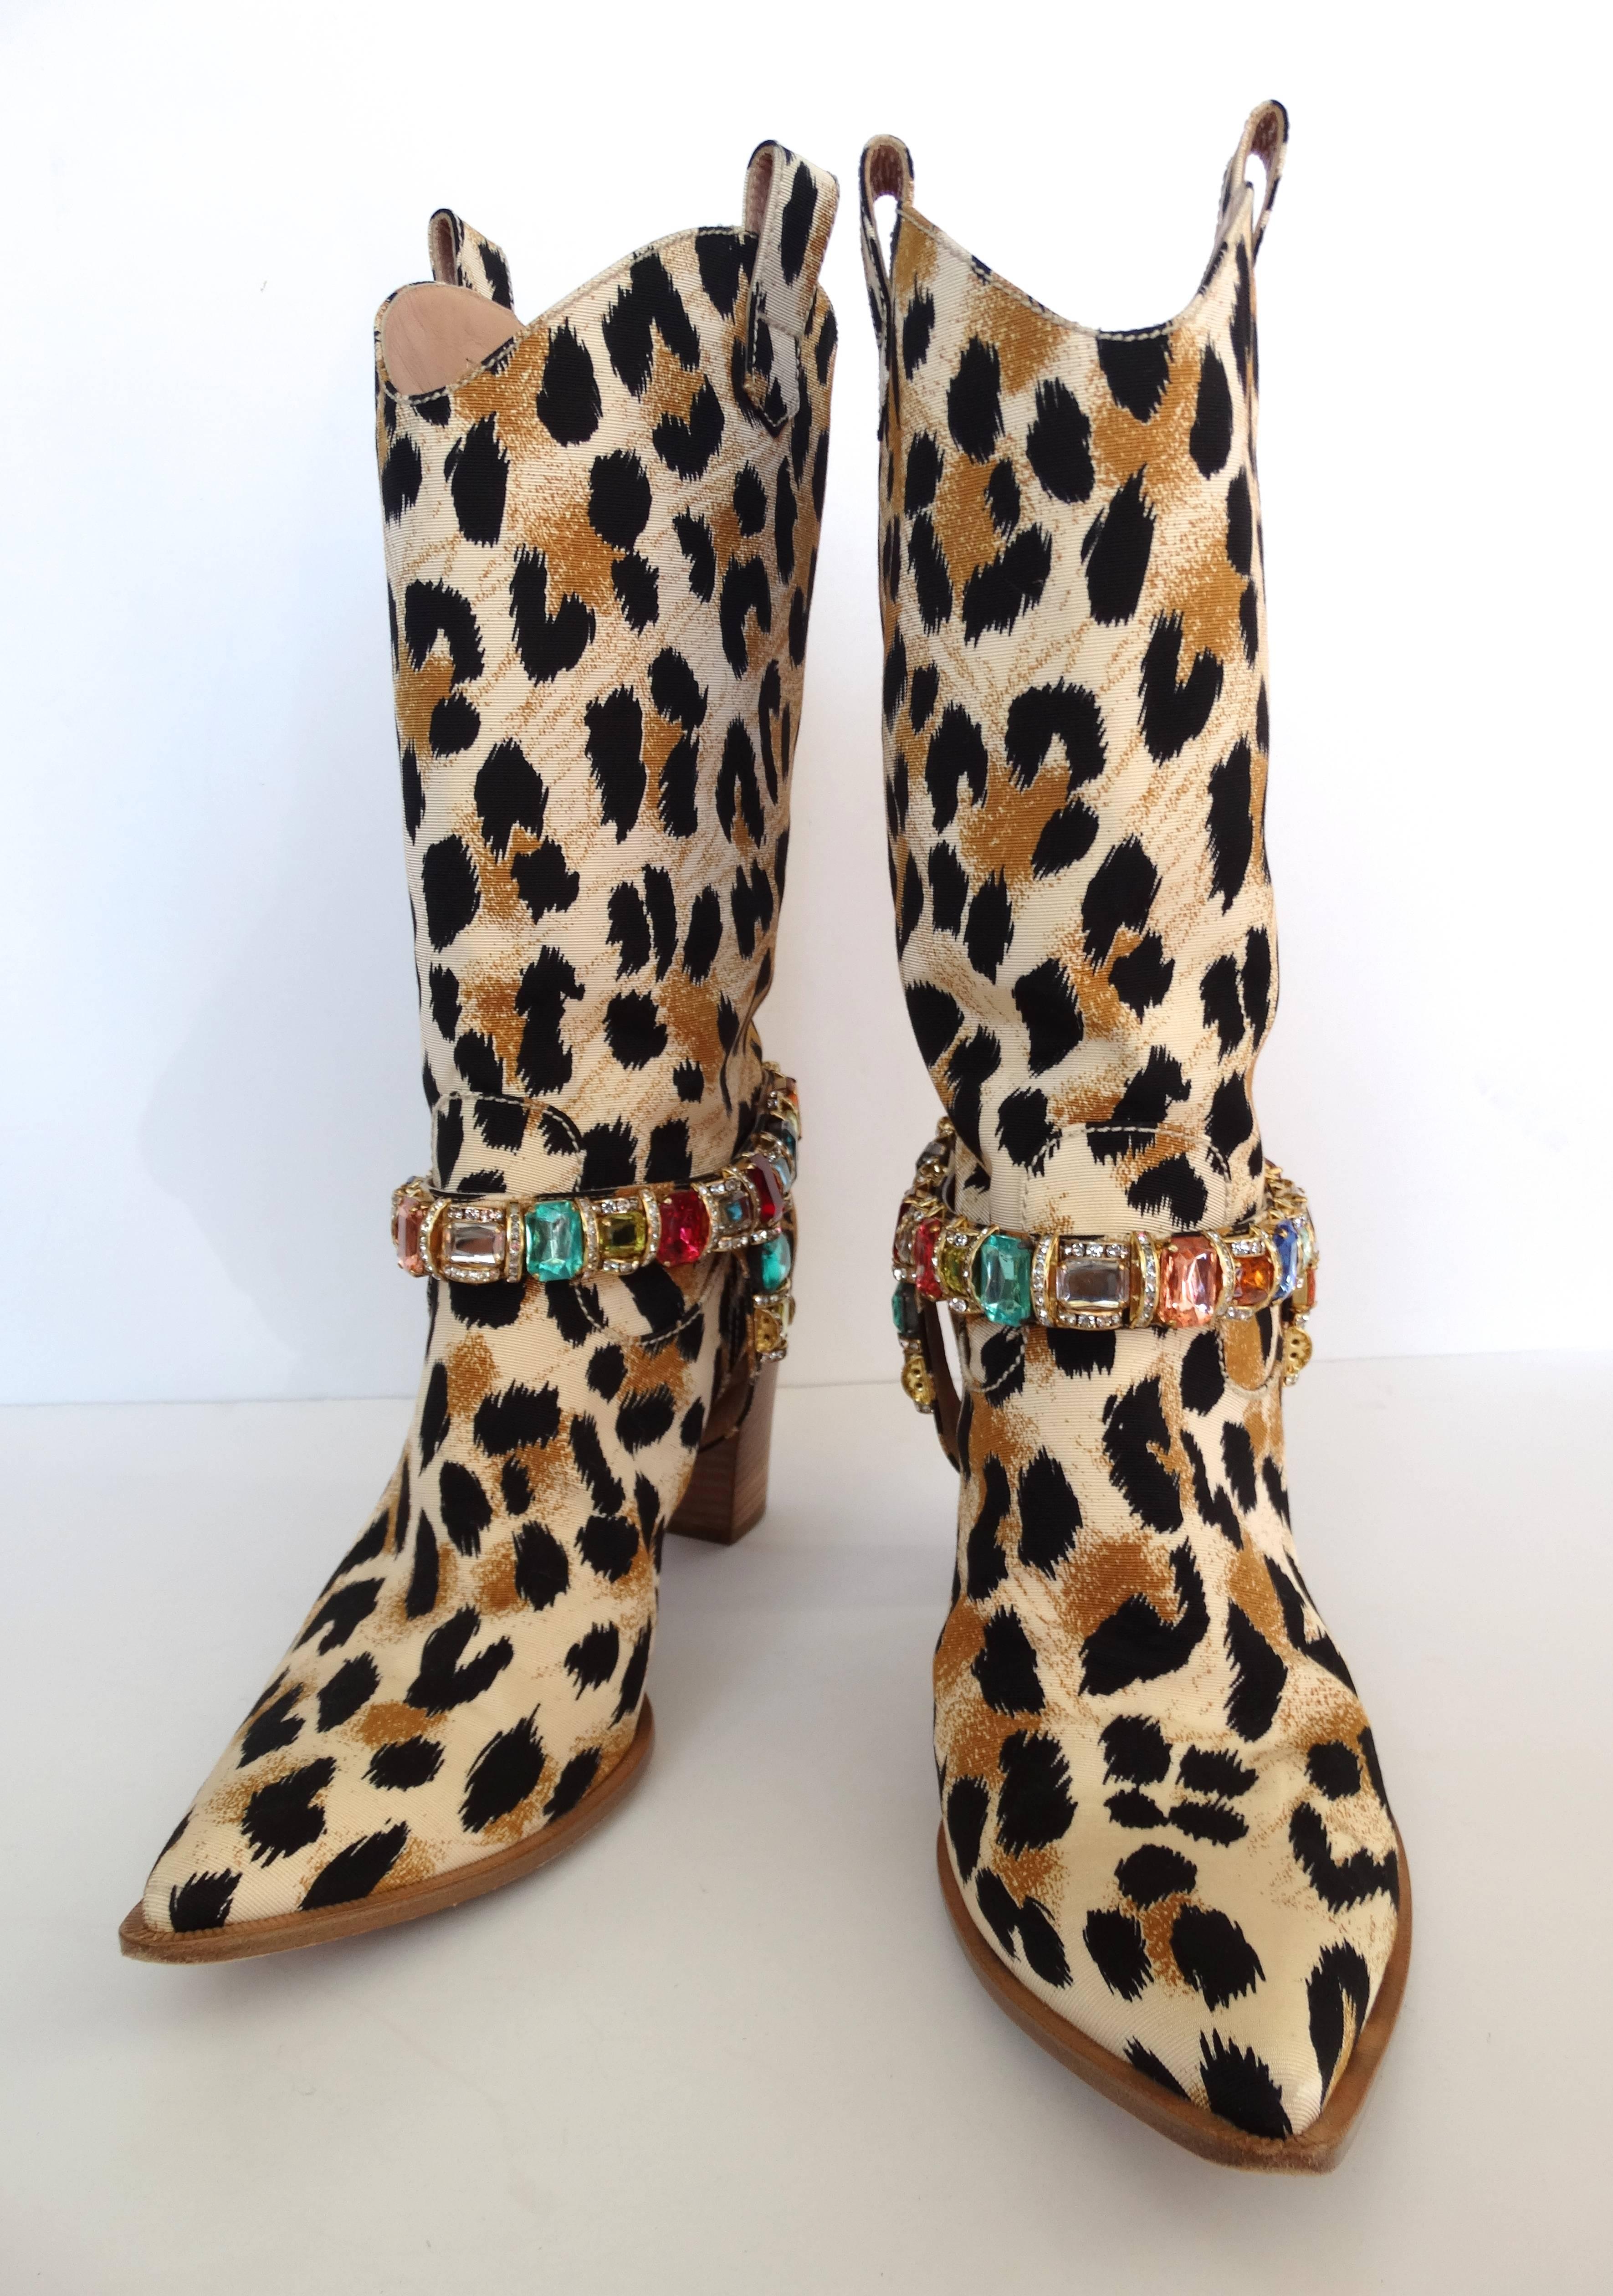 jeweled cowgirl boots